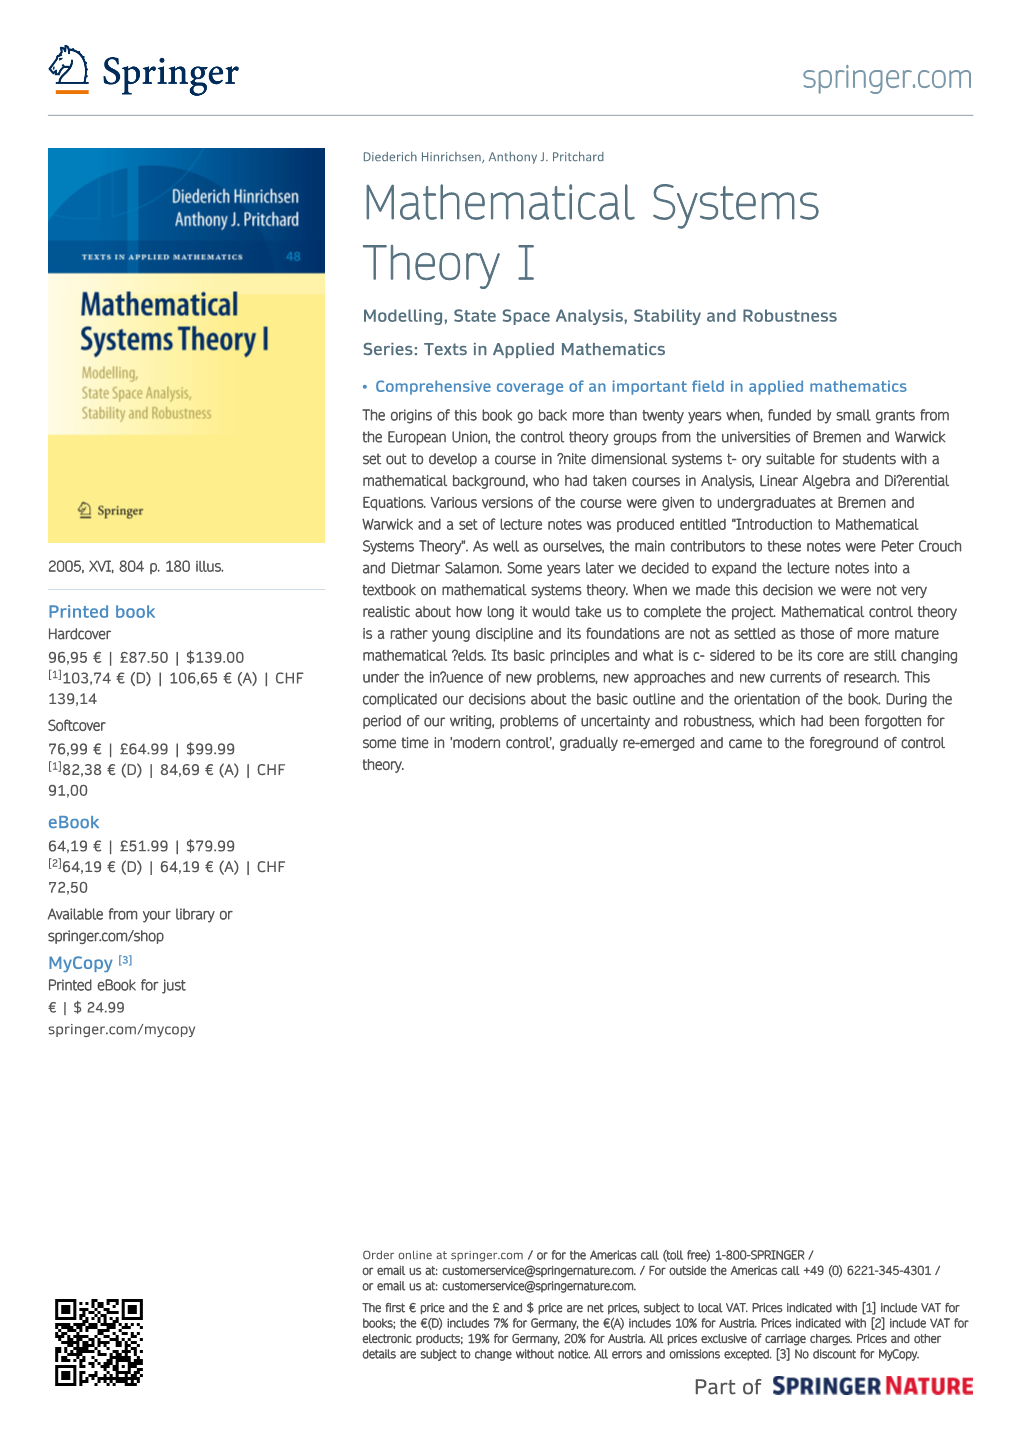 Mathematical Systems Theory I Modelling, State Space Analysis, Stability and Robustness Series: Texts in Applied Mathematics